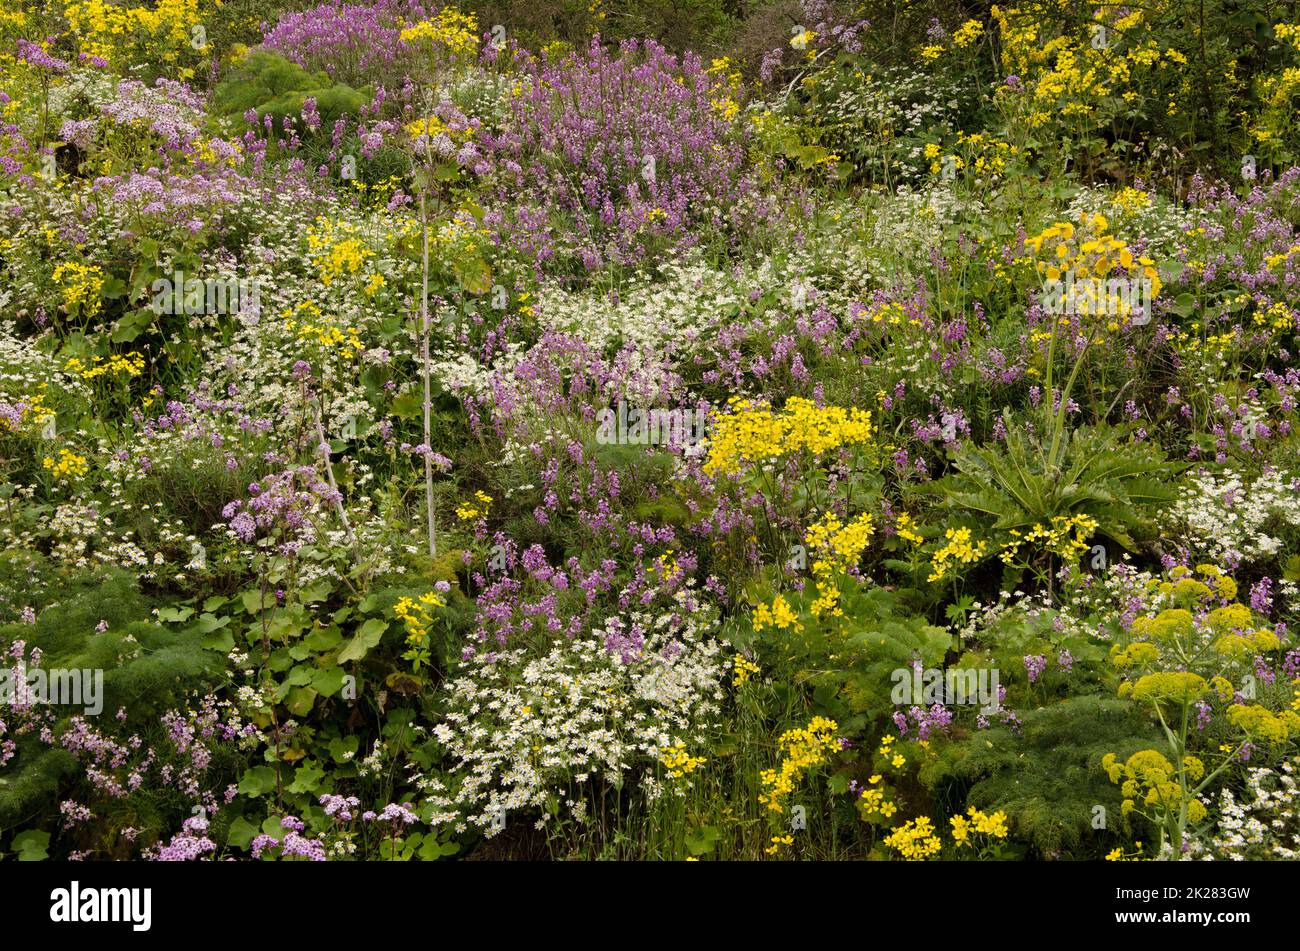 Biodiversity of flowering plants in the field. Stock Photo